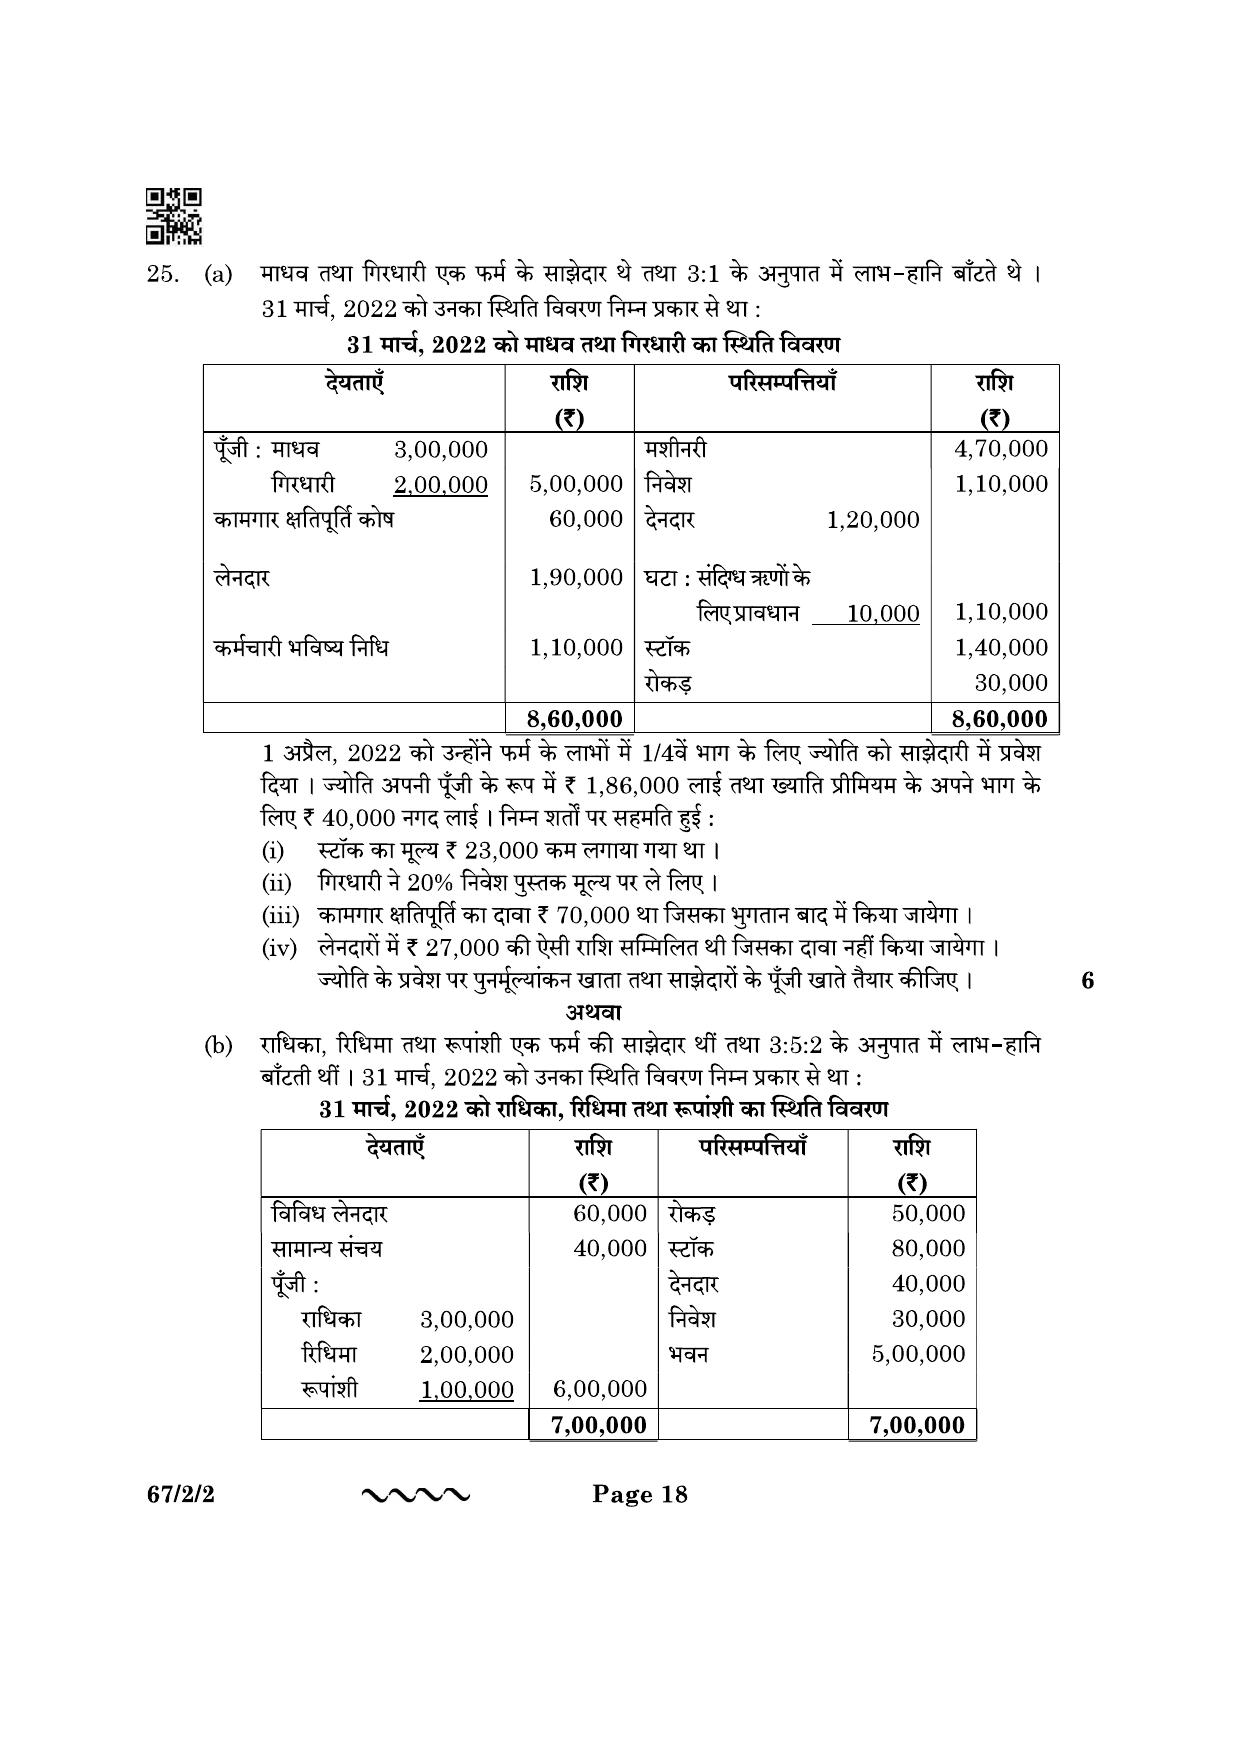 CBSE Class 12 67-2-2 Accountancy 2023 Question Paper - Page 18